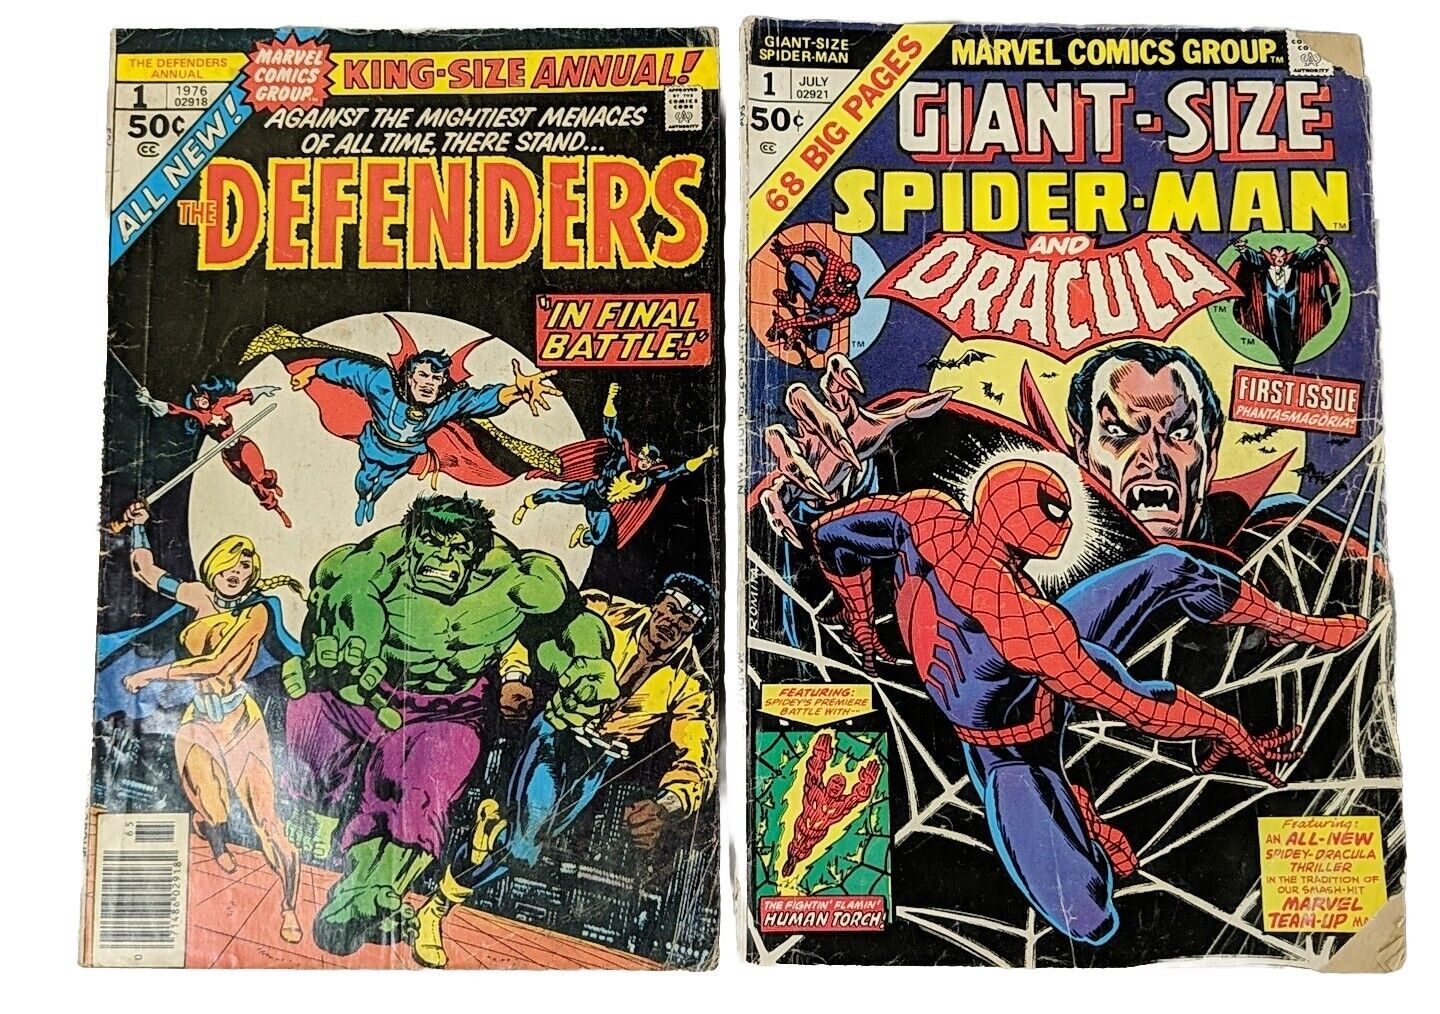 The Defenders King Size Annual  #1 VG & Spiderman & Dracula Giant Size #1 VG/VG-